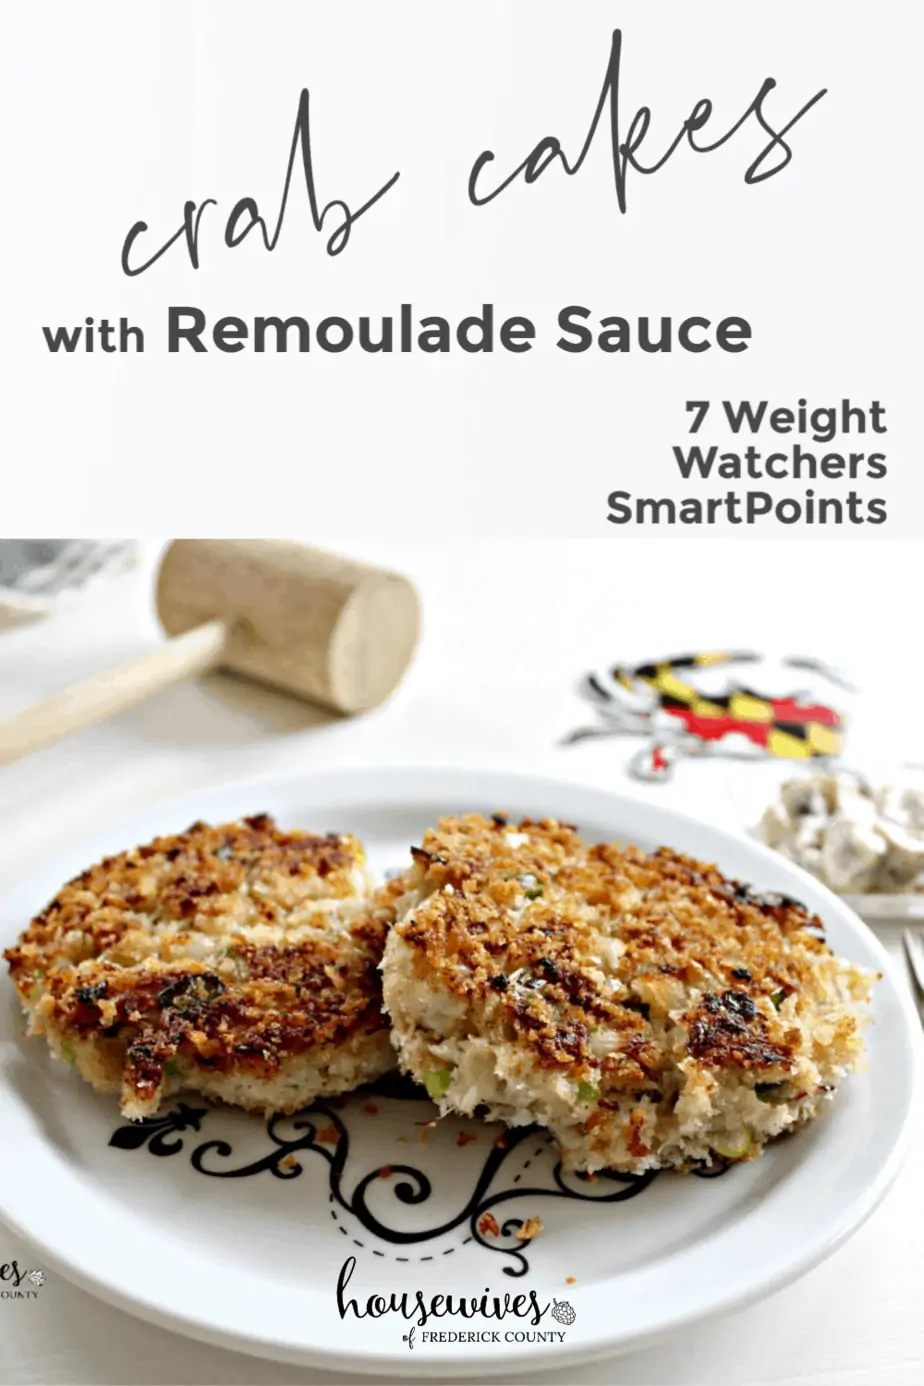 Crab Cakes Recipe with Remoulade Sauce: 7 Weight Watchers SmartPoints